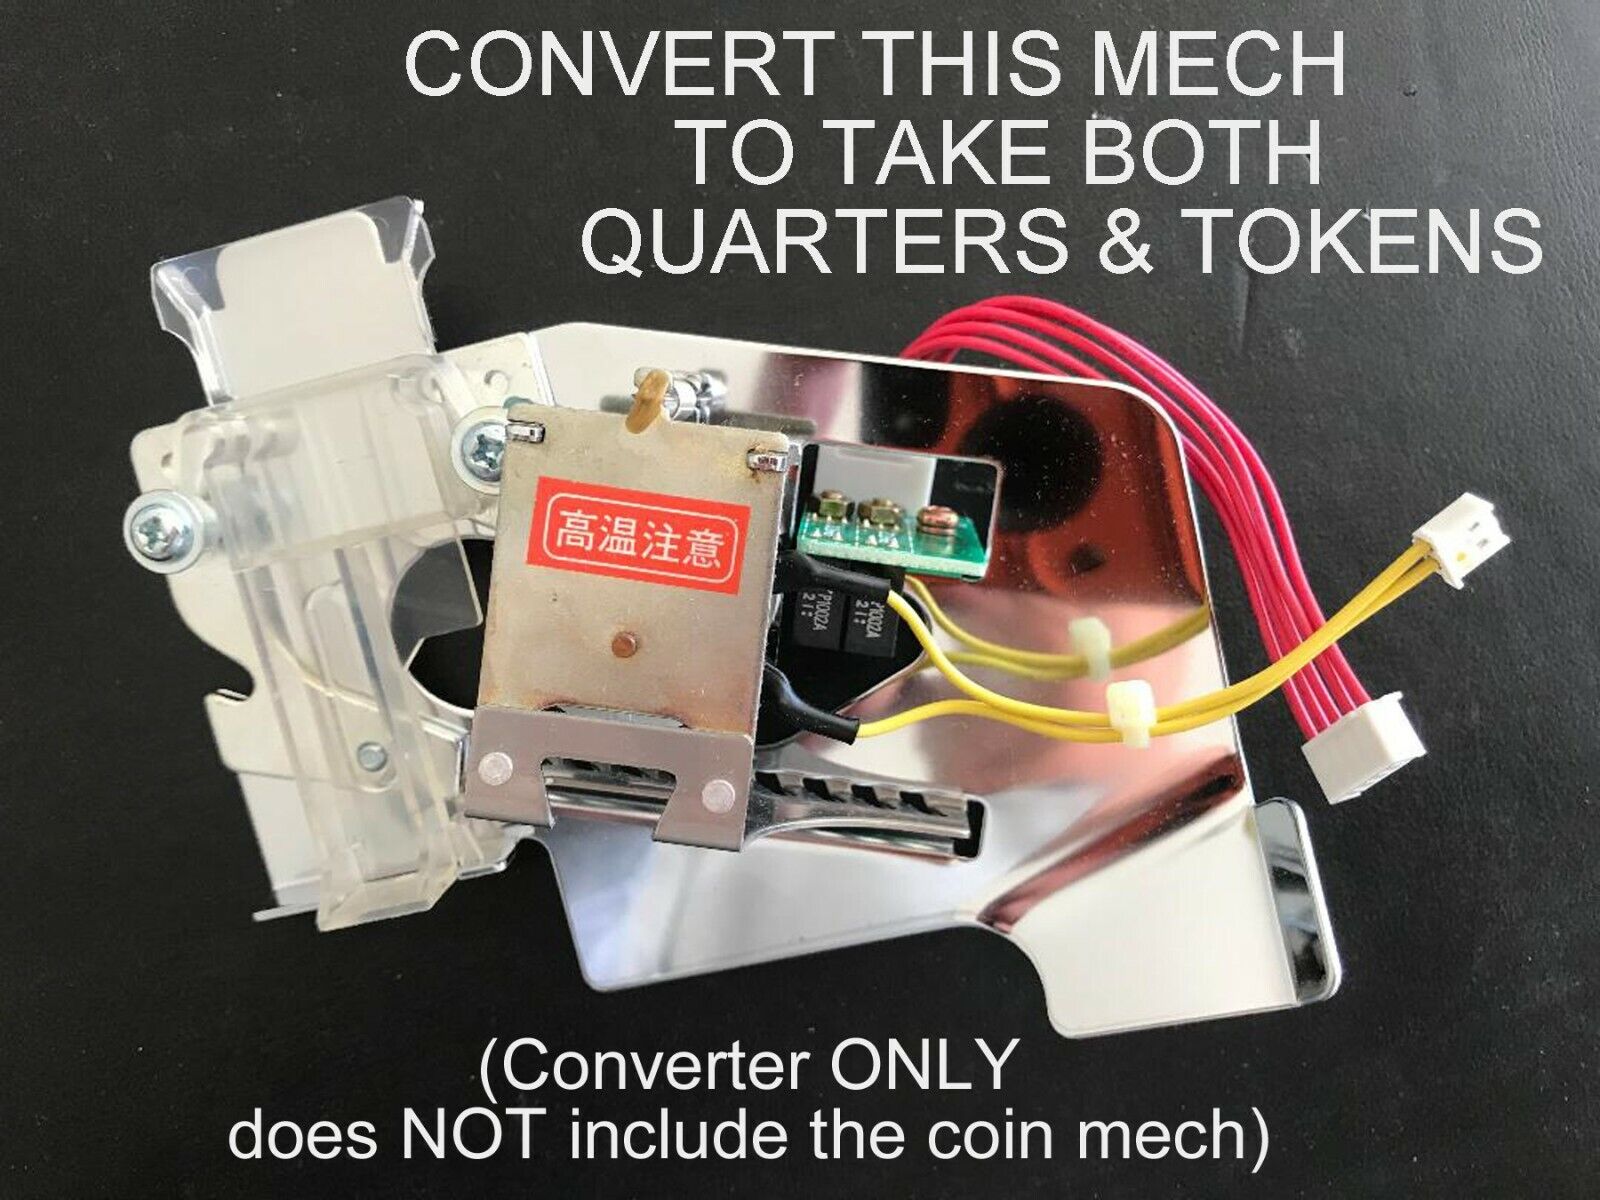 $.25 CONVERTER FOR PACHISLO SLOT MACHINES - ACCEPTS BOTH QUARTERS & TOKENS